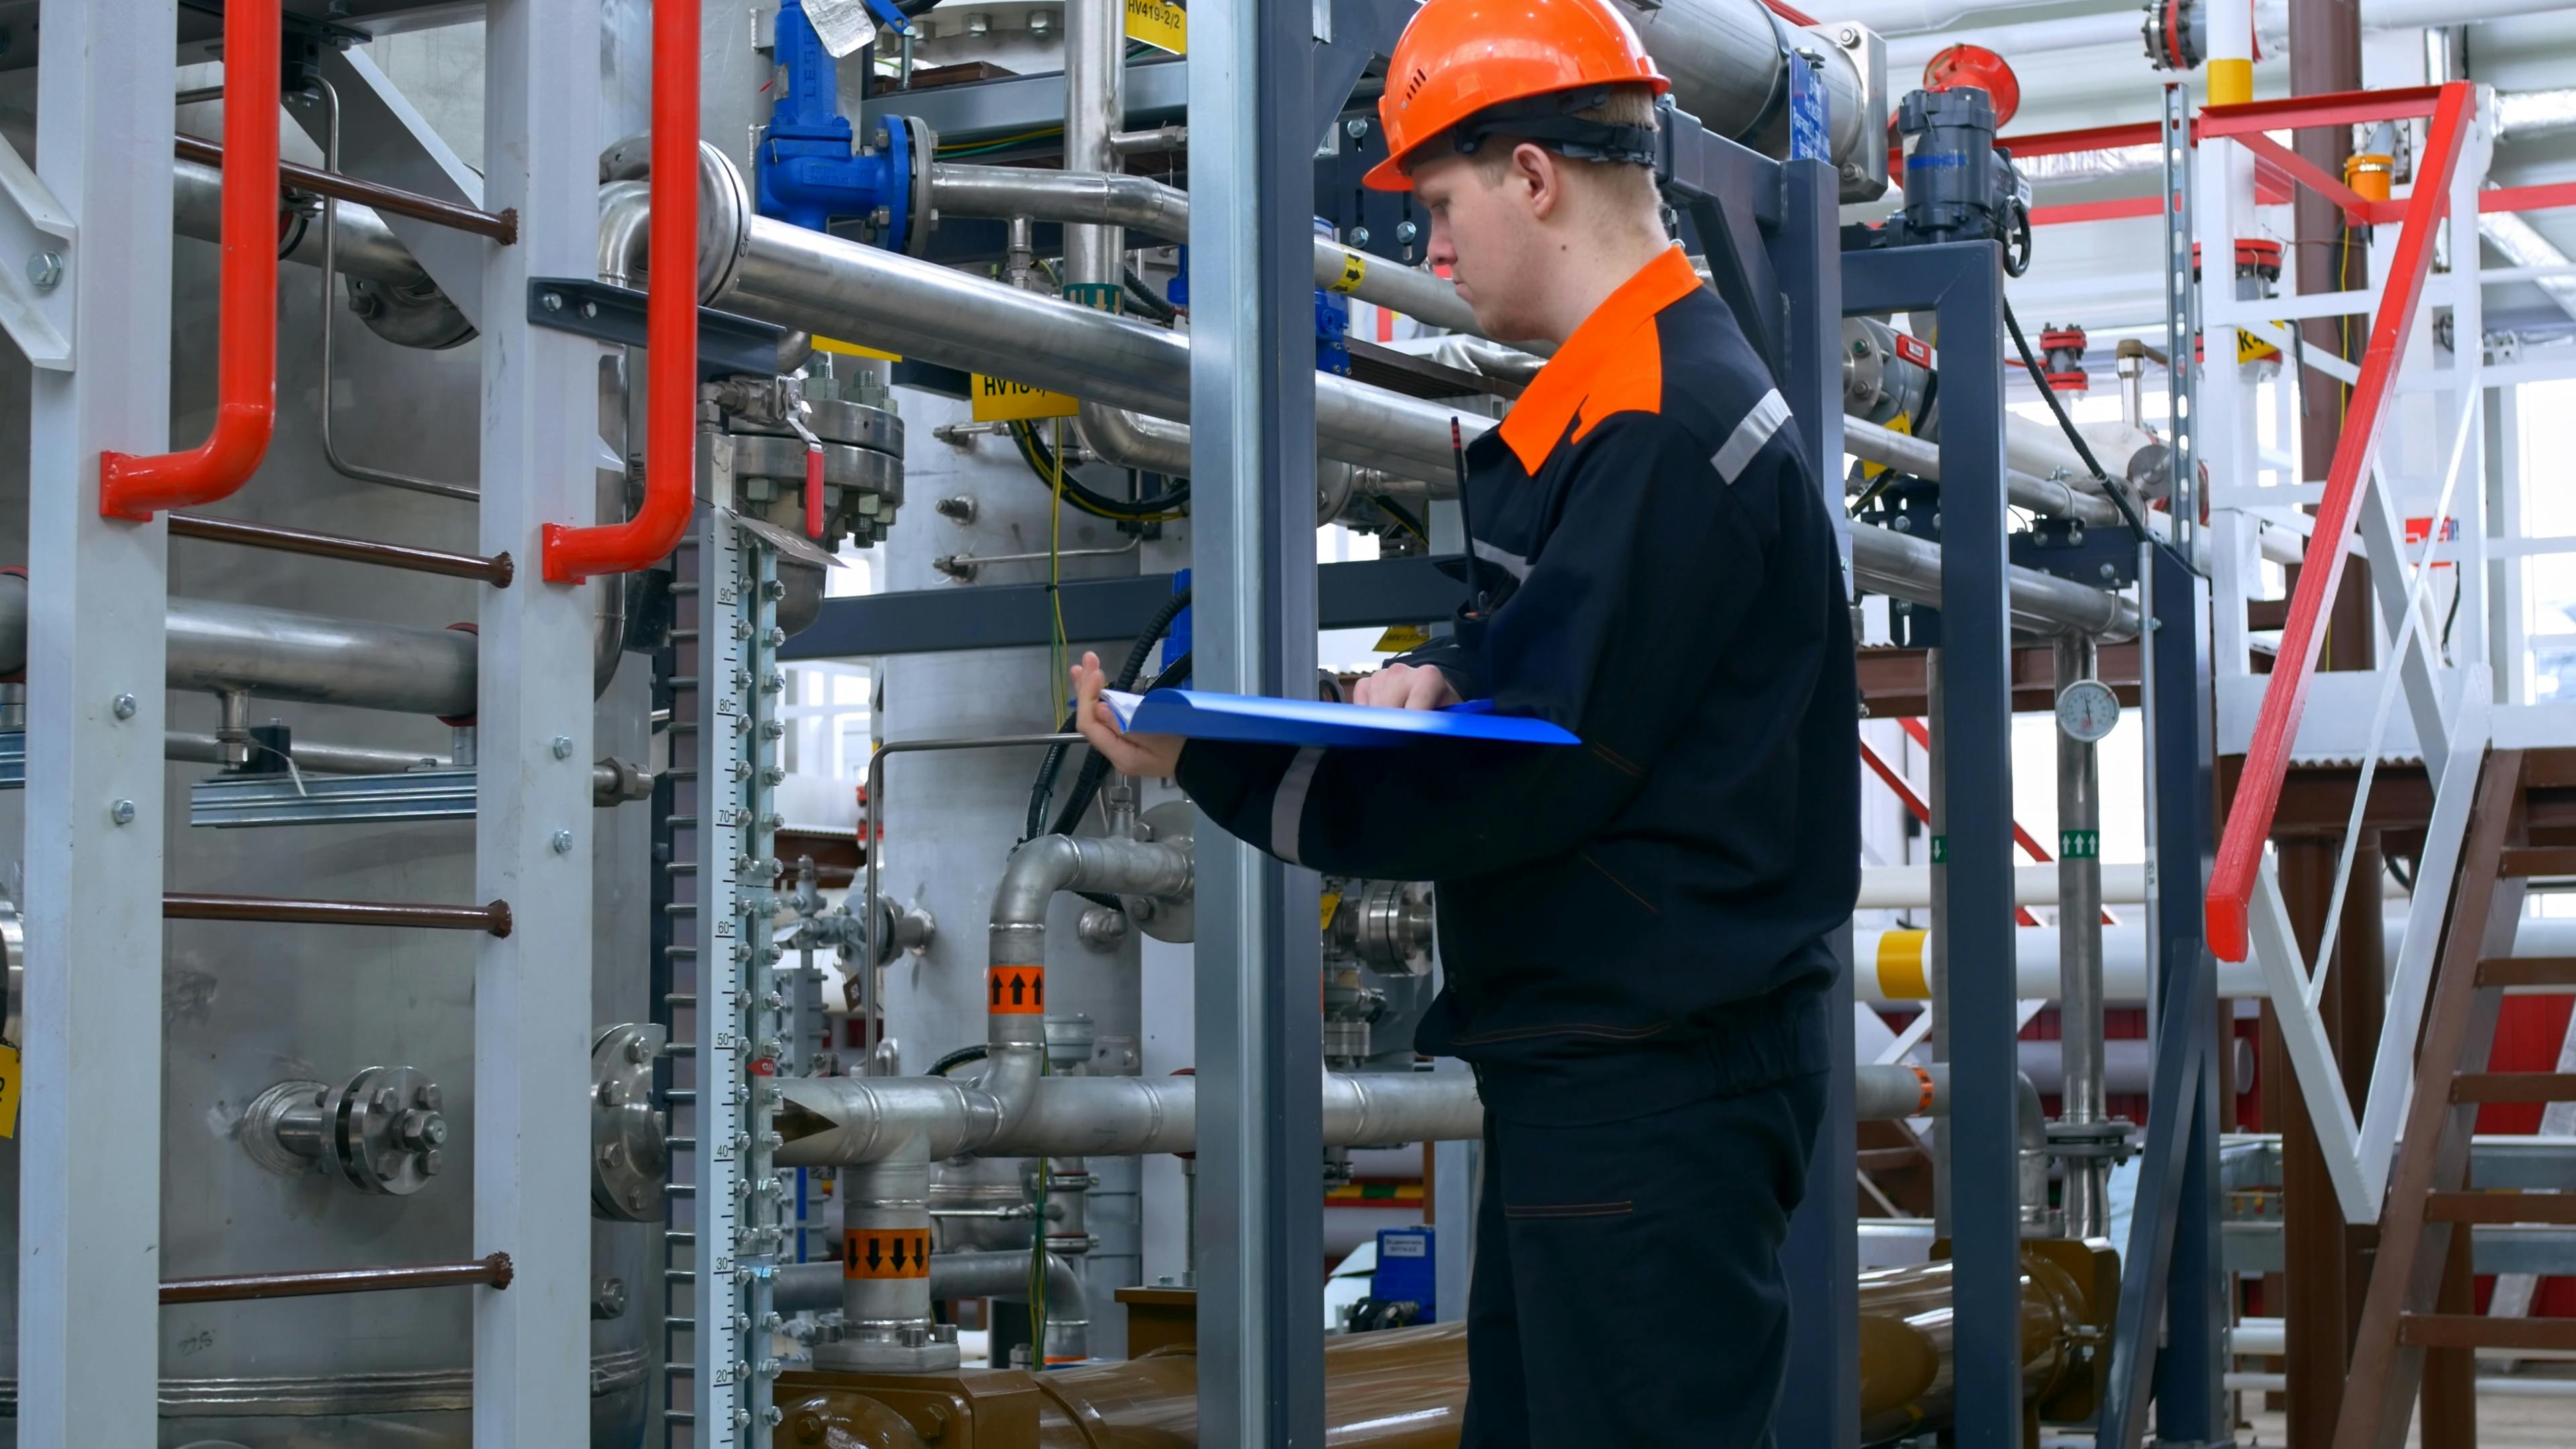 Conducting an equipment audit for industrial processes